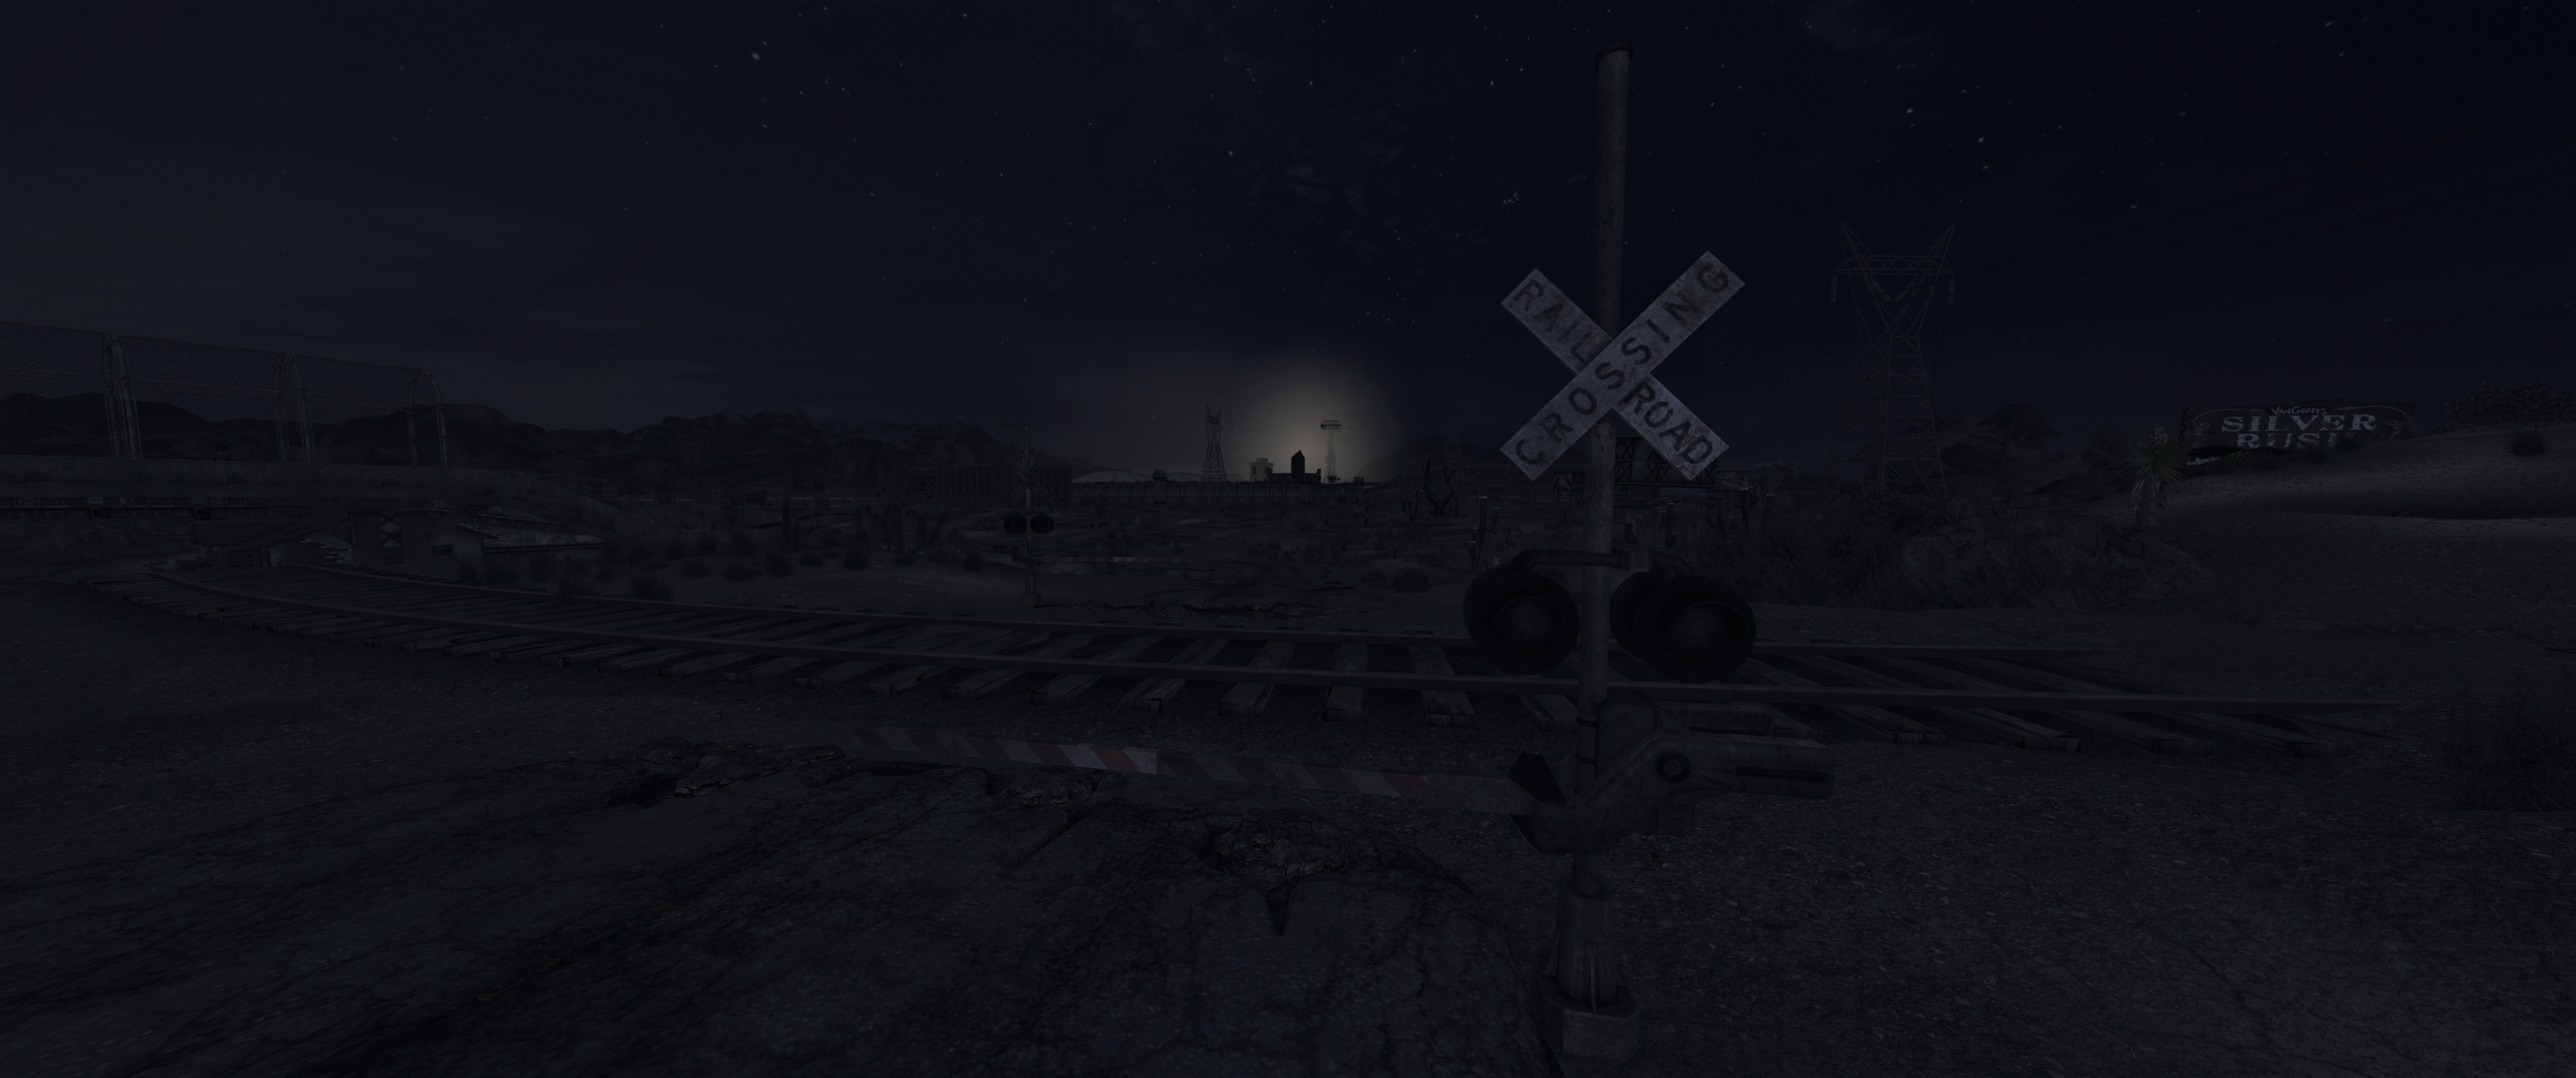 General 3440x1440 Fallout: New Vegas night railway crossing Nevada video games sign Obsidian Entertainment